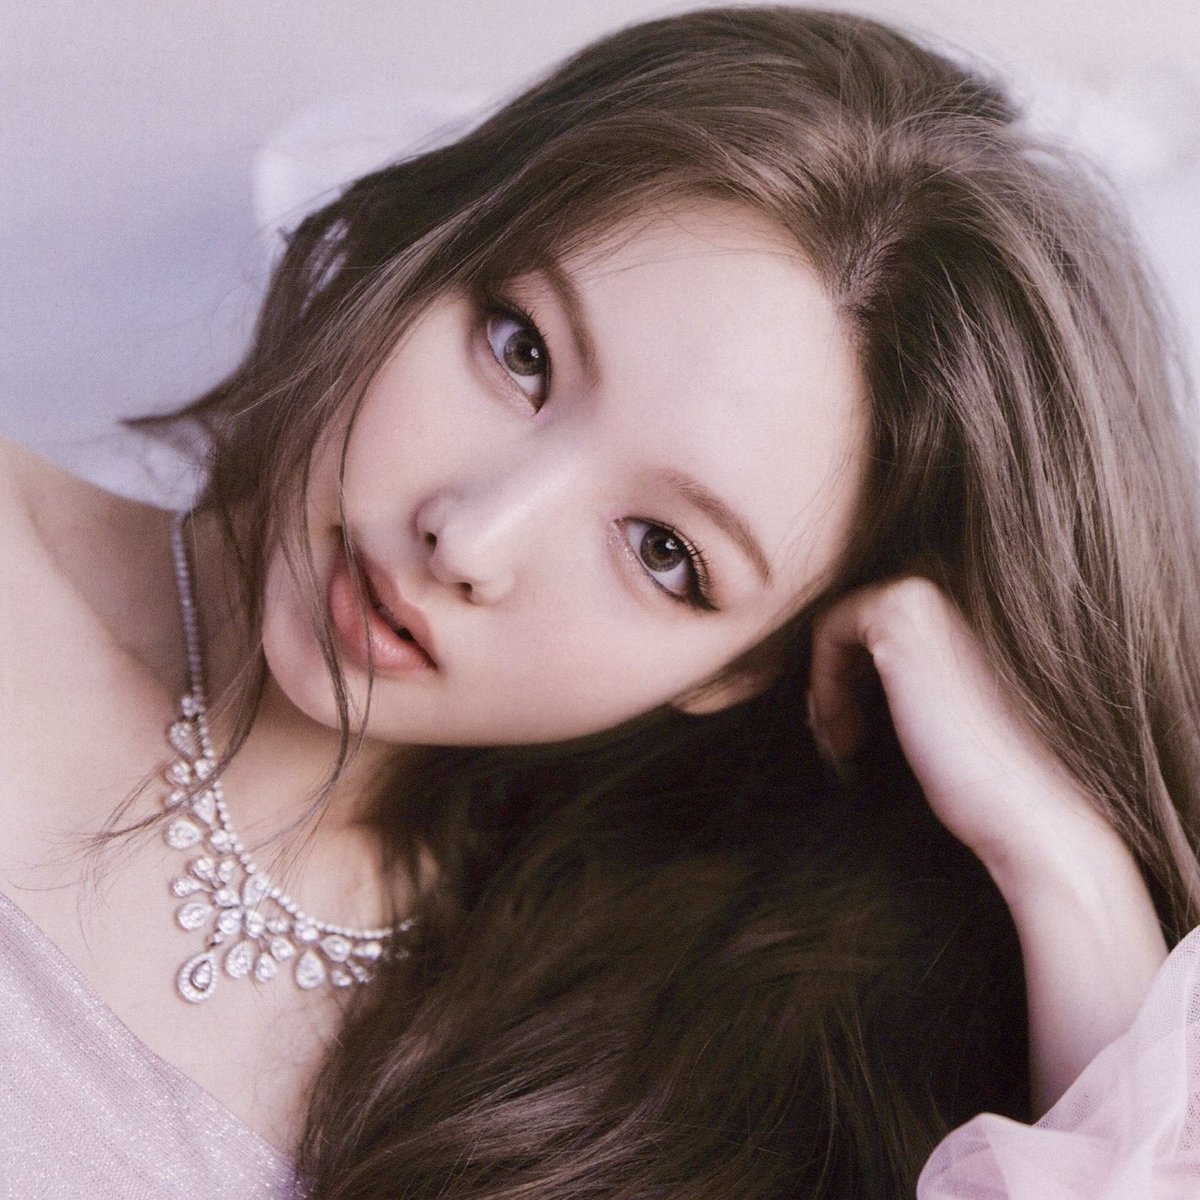 📊 Longest Charting Korean Solo Songs on Global Spotify Chart: #1. JENNIE 'SOLO' — 79 days #2. #NAYEON'POP!' — 71 days* ⬆️ #3. LISA 'LALISA' — 70 days ⬇️ (* = still charting) @JYPETWICE